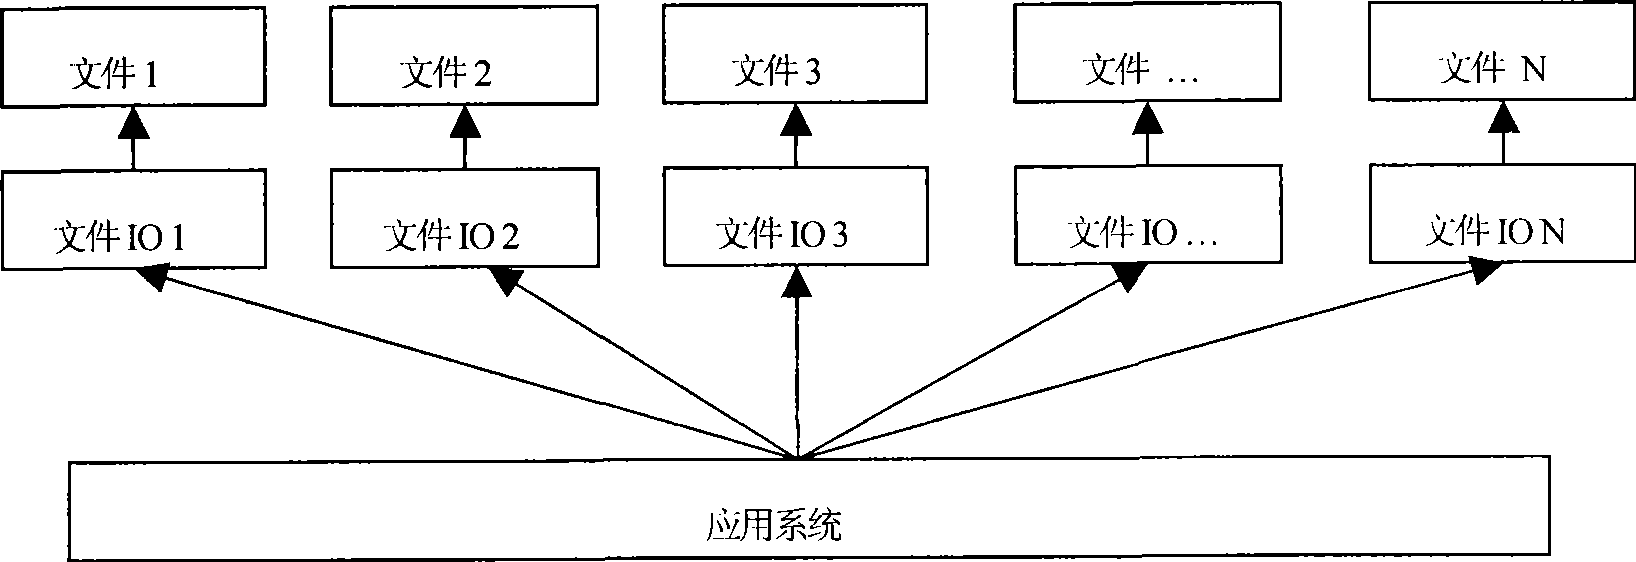 Mass file data storing and reading method